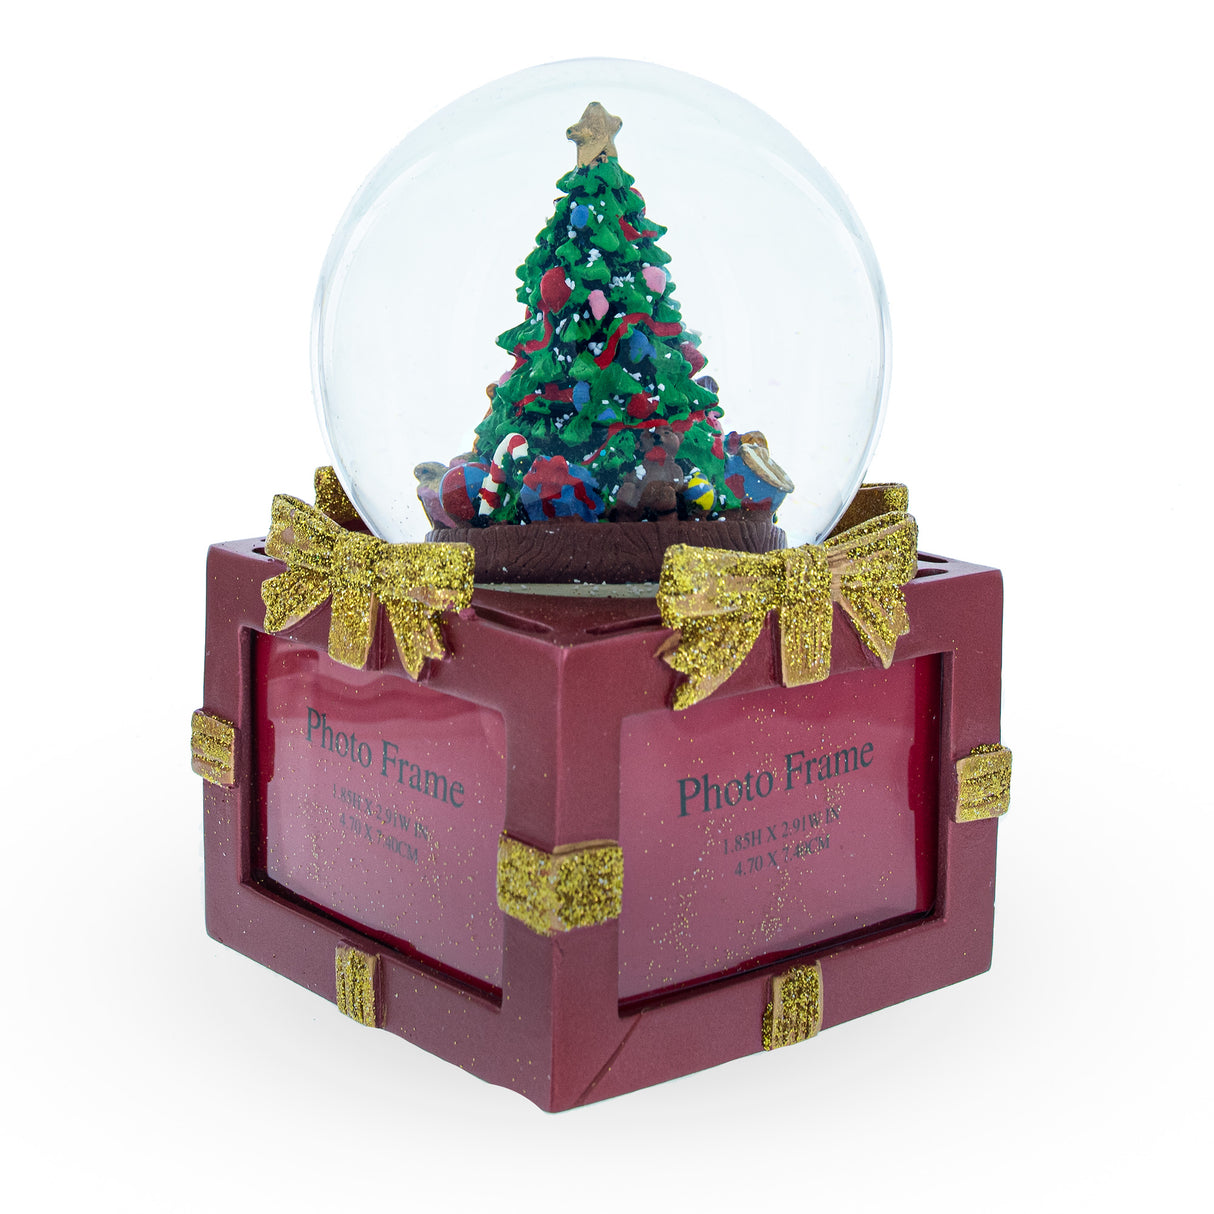 Resin Four-Sided Picture Frame Christmas Tree: Musical Water Snow Globe in Red color Round